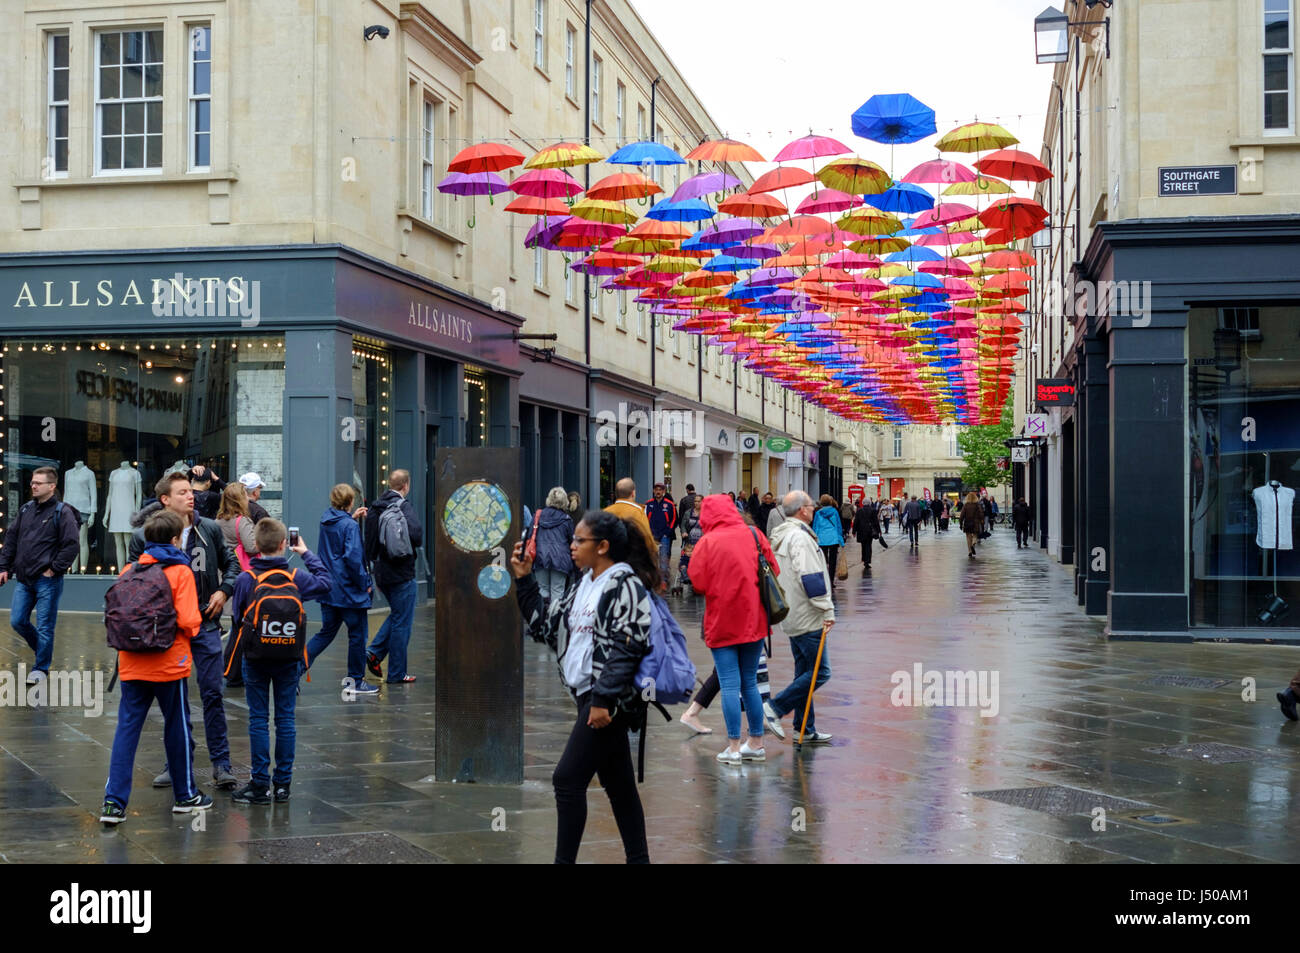 Bath, UK. 15th May, 2017. UK Weather. A drizzly wet day in Bath. Shoppers stop to look at the timely installation of colourful umbrellas. Credit: Mr Standfast/Alamy Live News Stock Photo